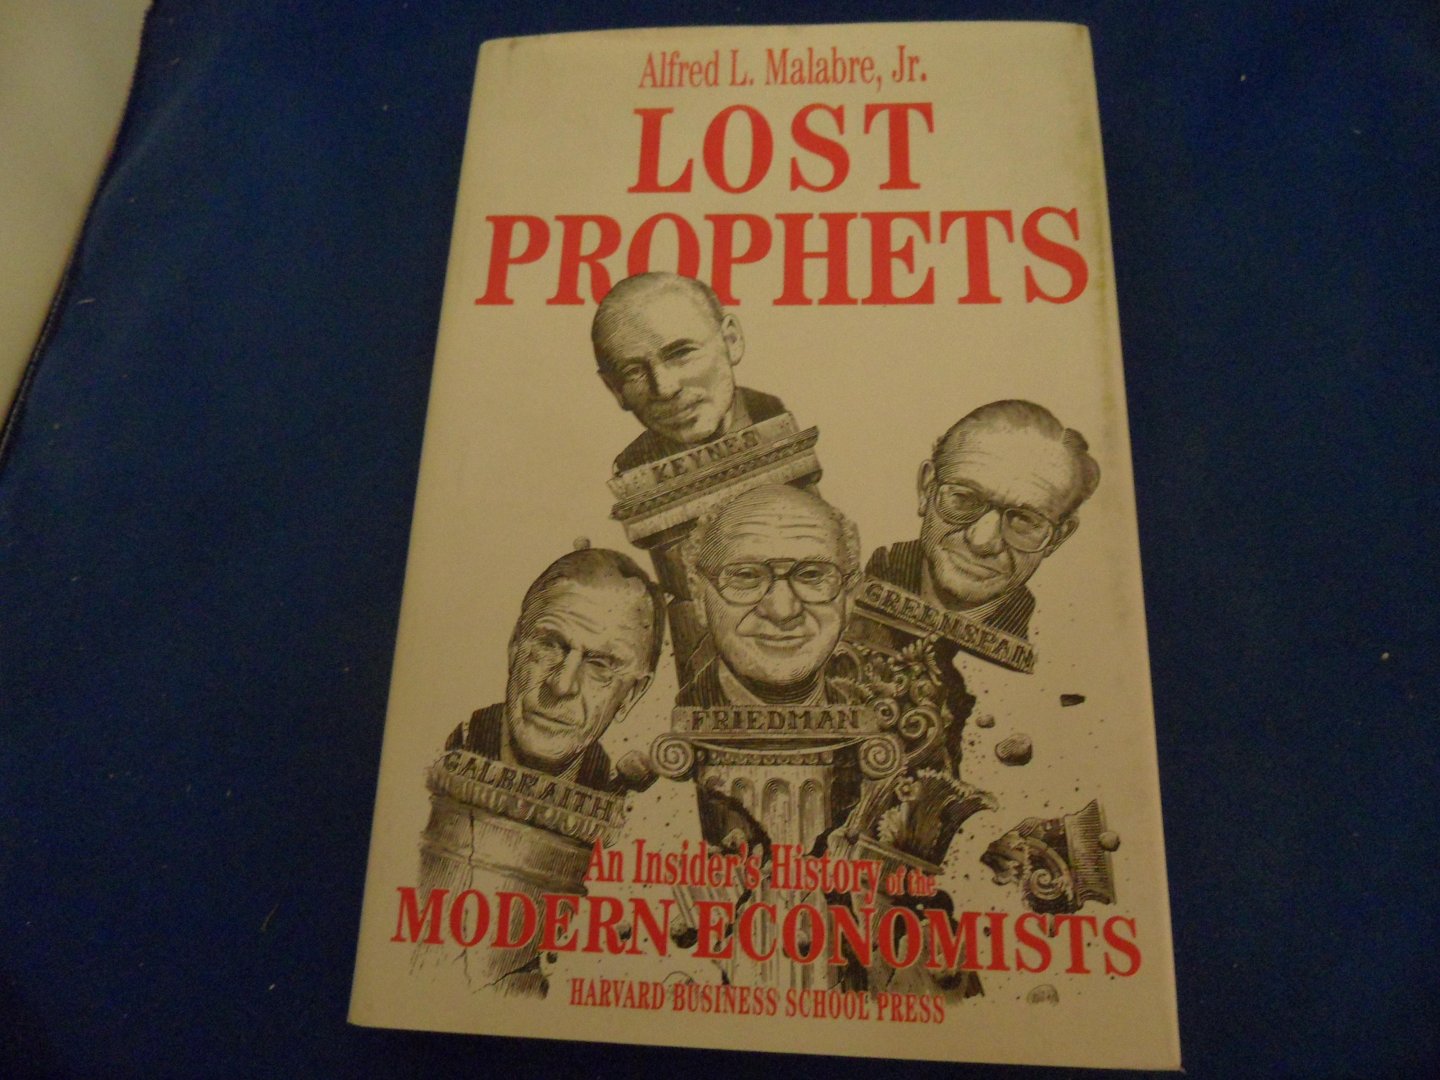 Malabre, Alfred L. - Lost prophets. An Insider's History of the Modern Economics